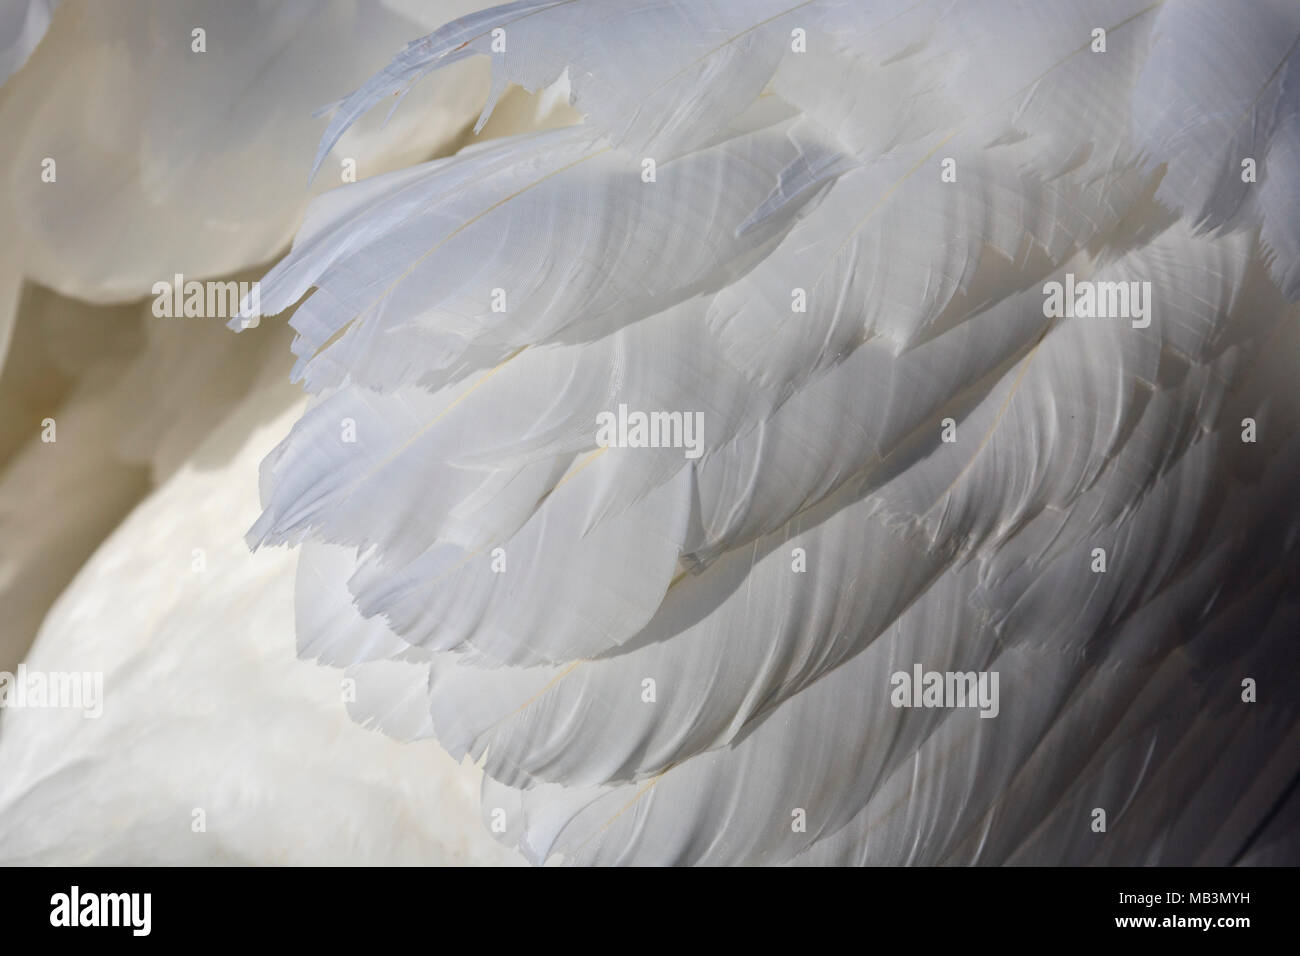 Detail of white Swan feathers Stock Photo